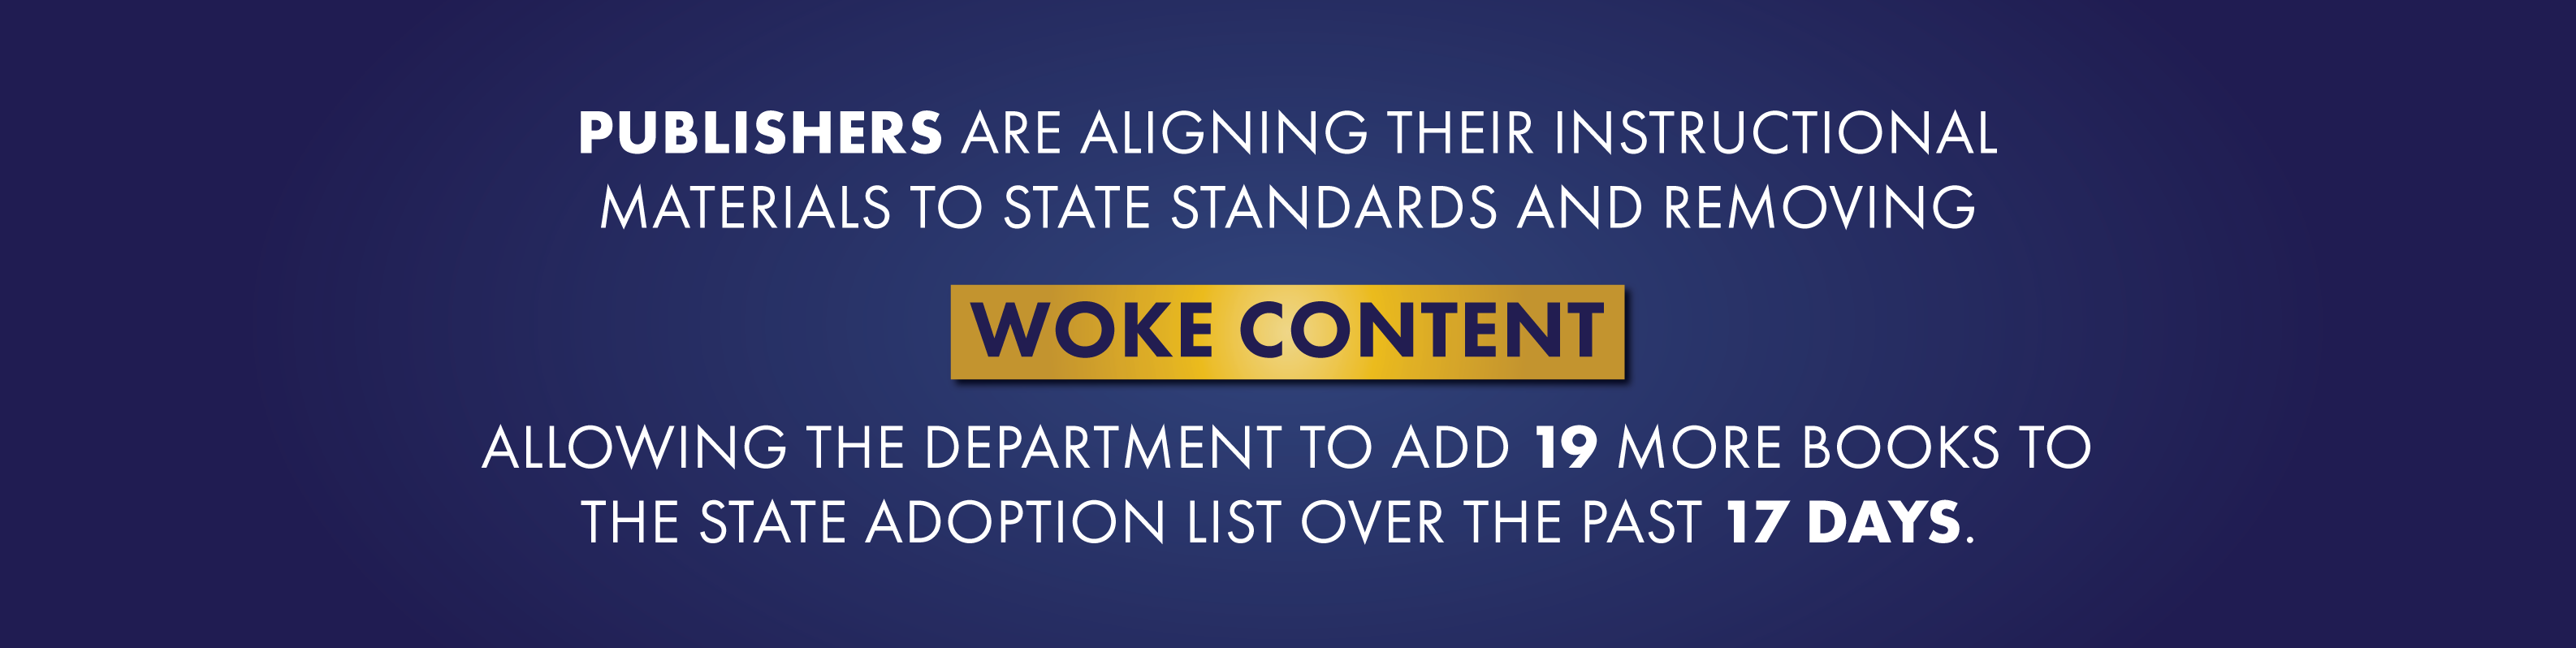 Publishers are aligning their instructional materials to state standards and removing woke content allowing the department to add 19 more books to the state adoption list over the past 17 days.